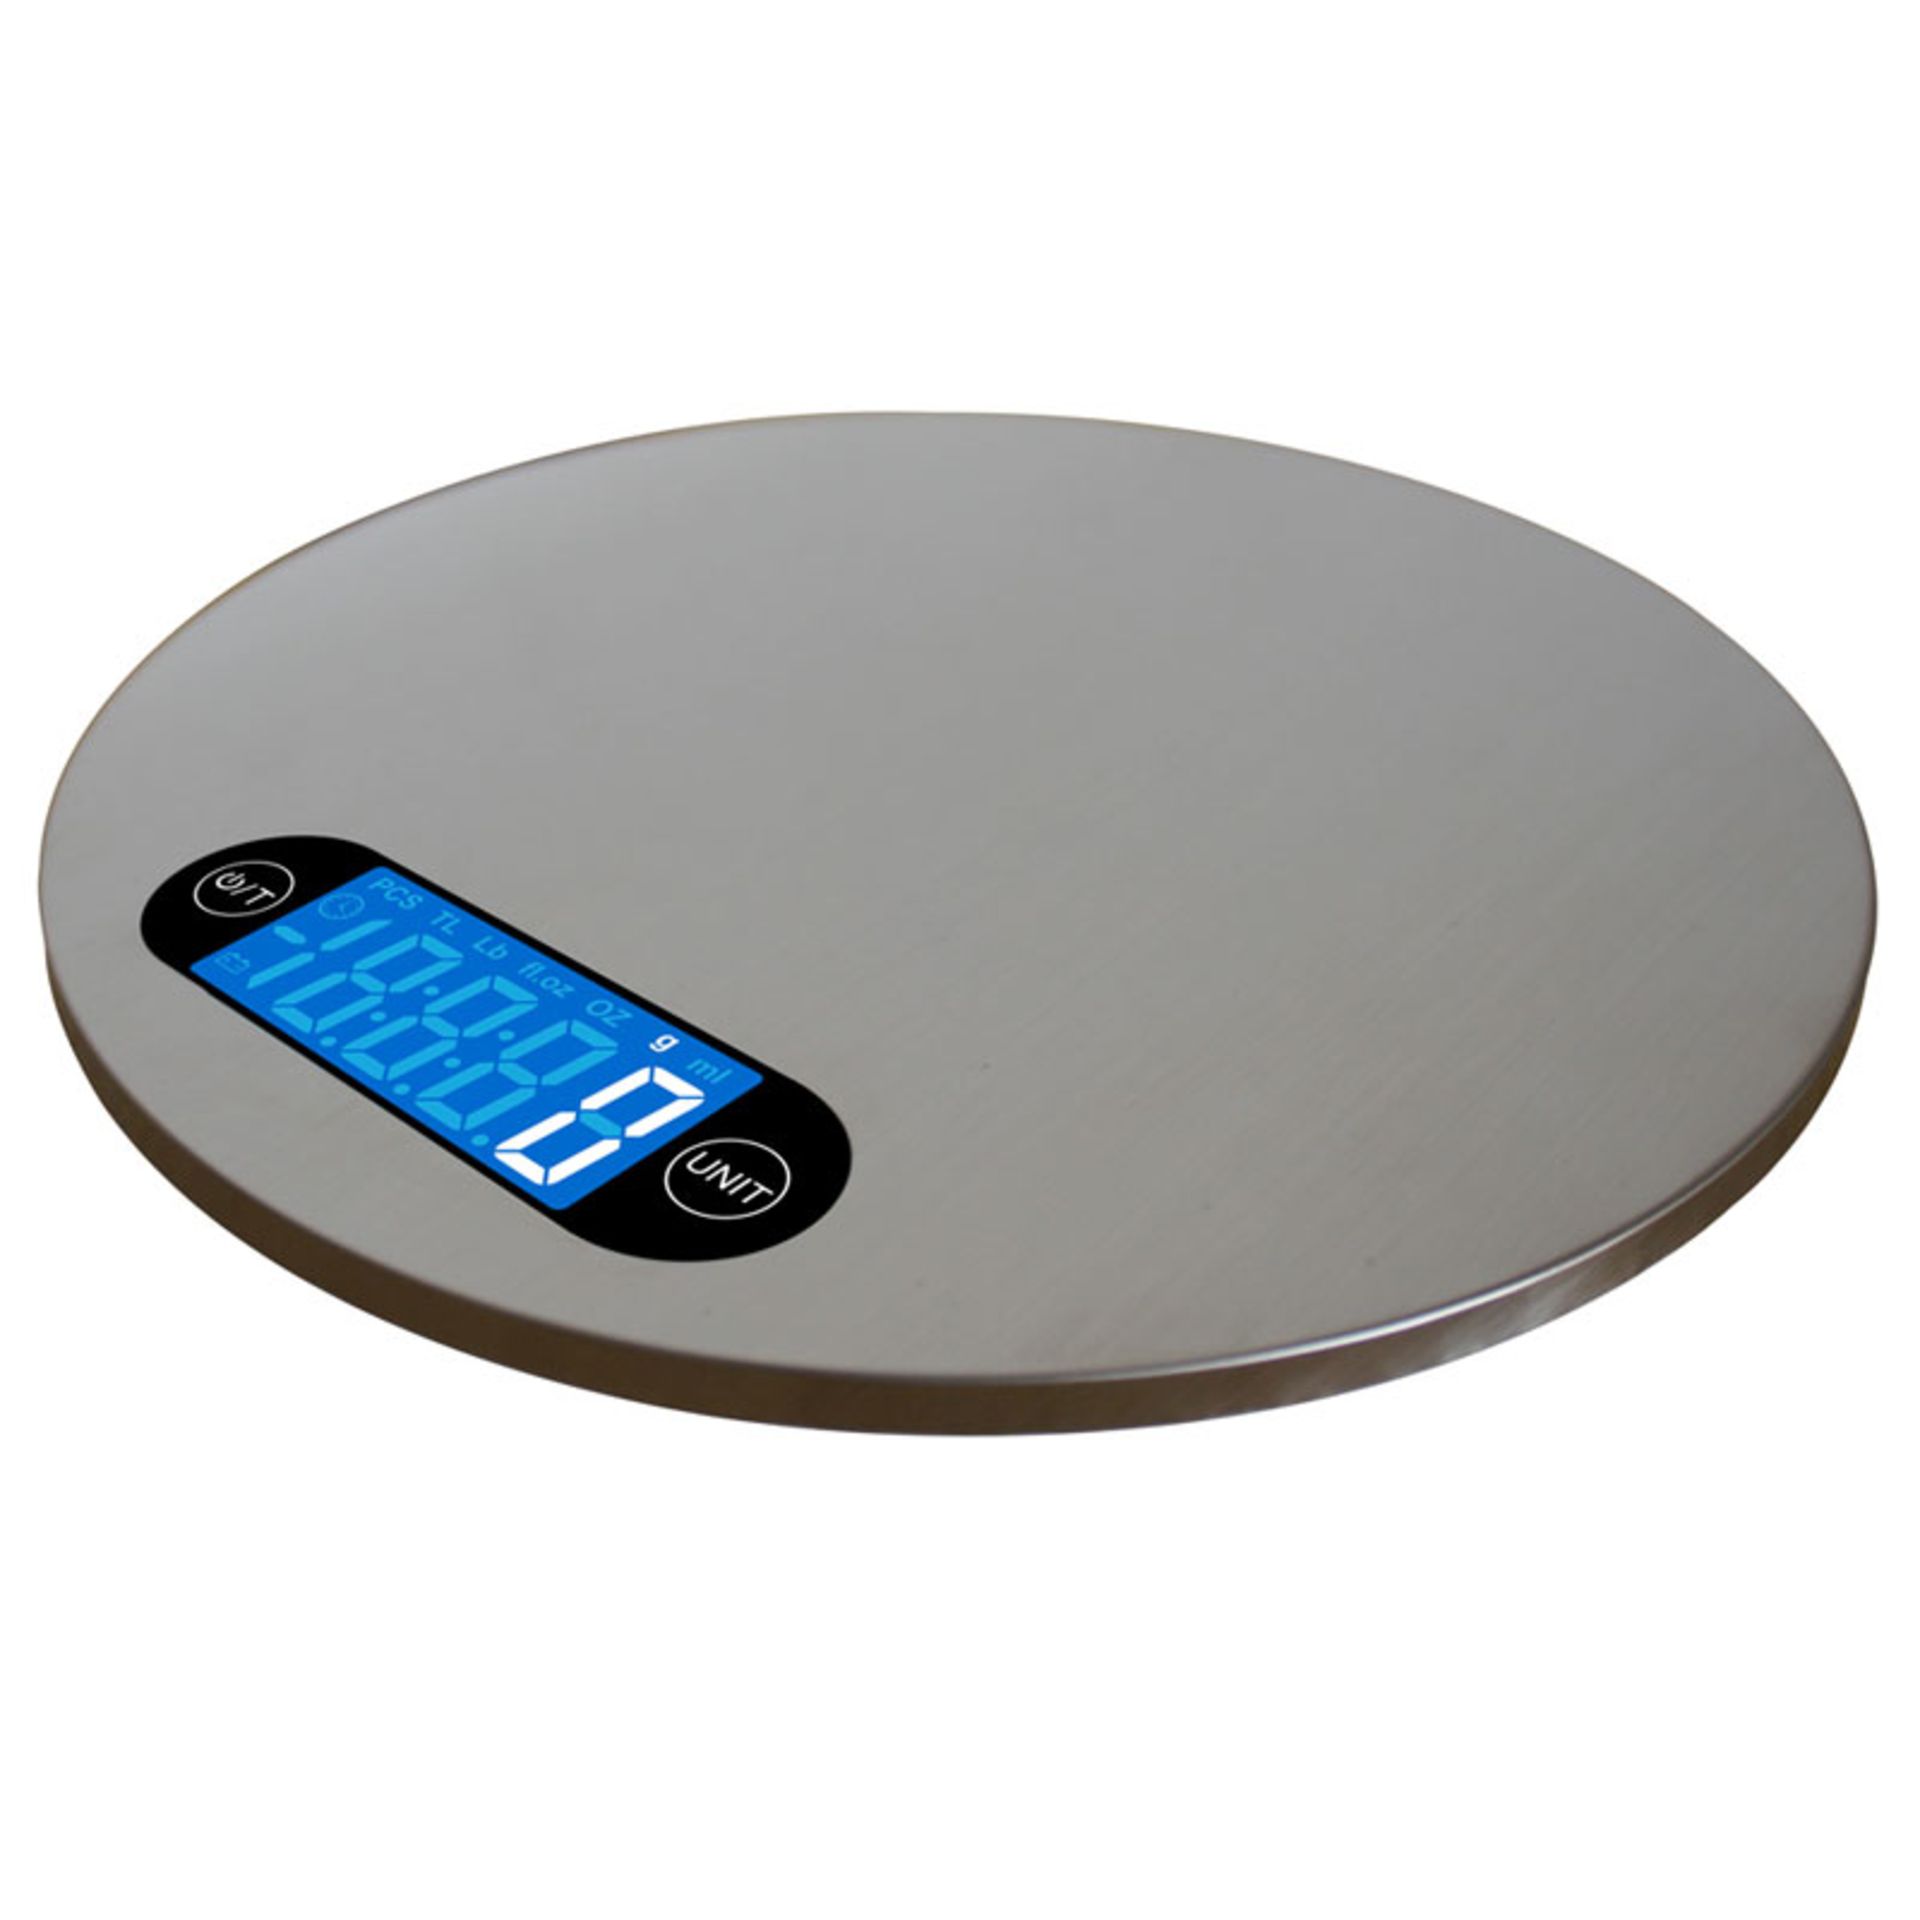 V Brand New Digital Kitchen Scales with Large LCD Display in lbs OZs and Grams (Styles may vary - Image 4 of 4